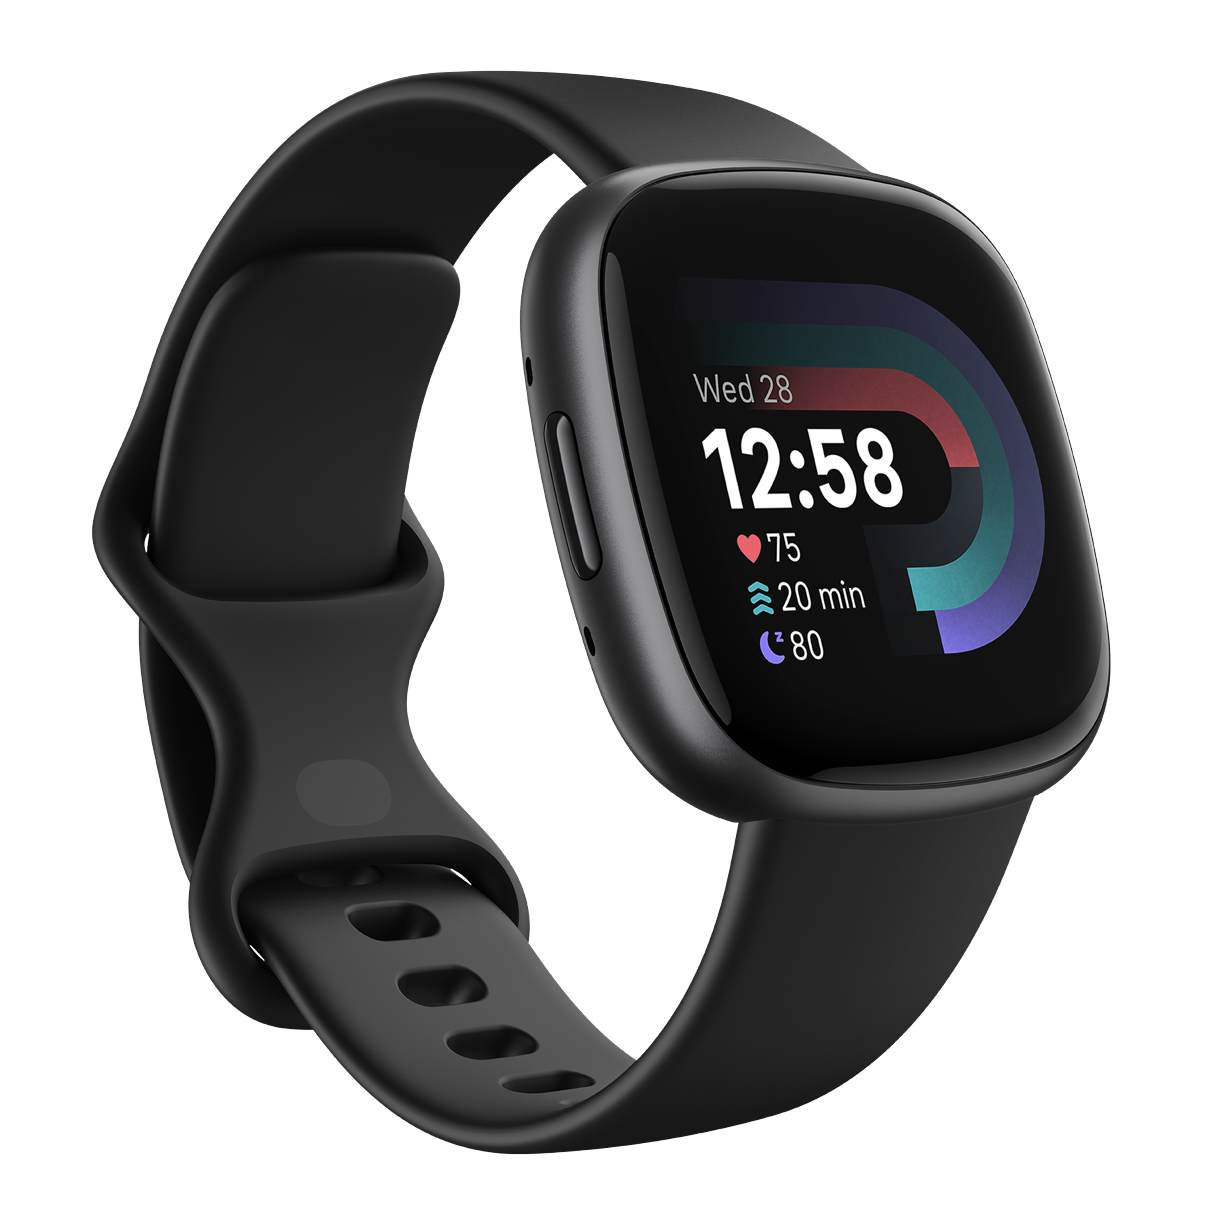 Fitbit Versa 4 review: Fitness tracker disguised as a smartwatch